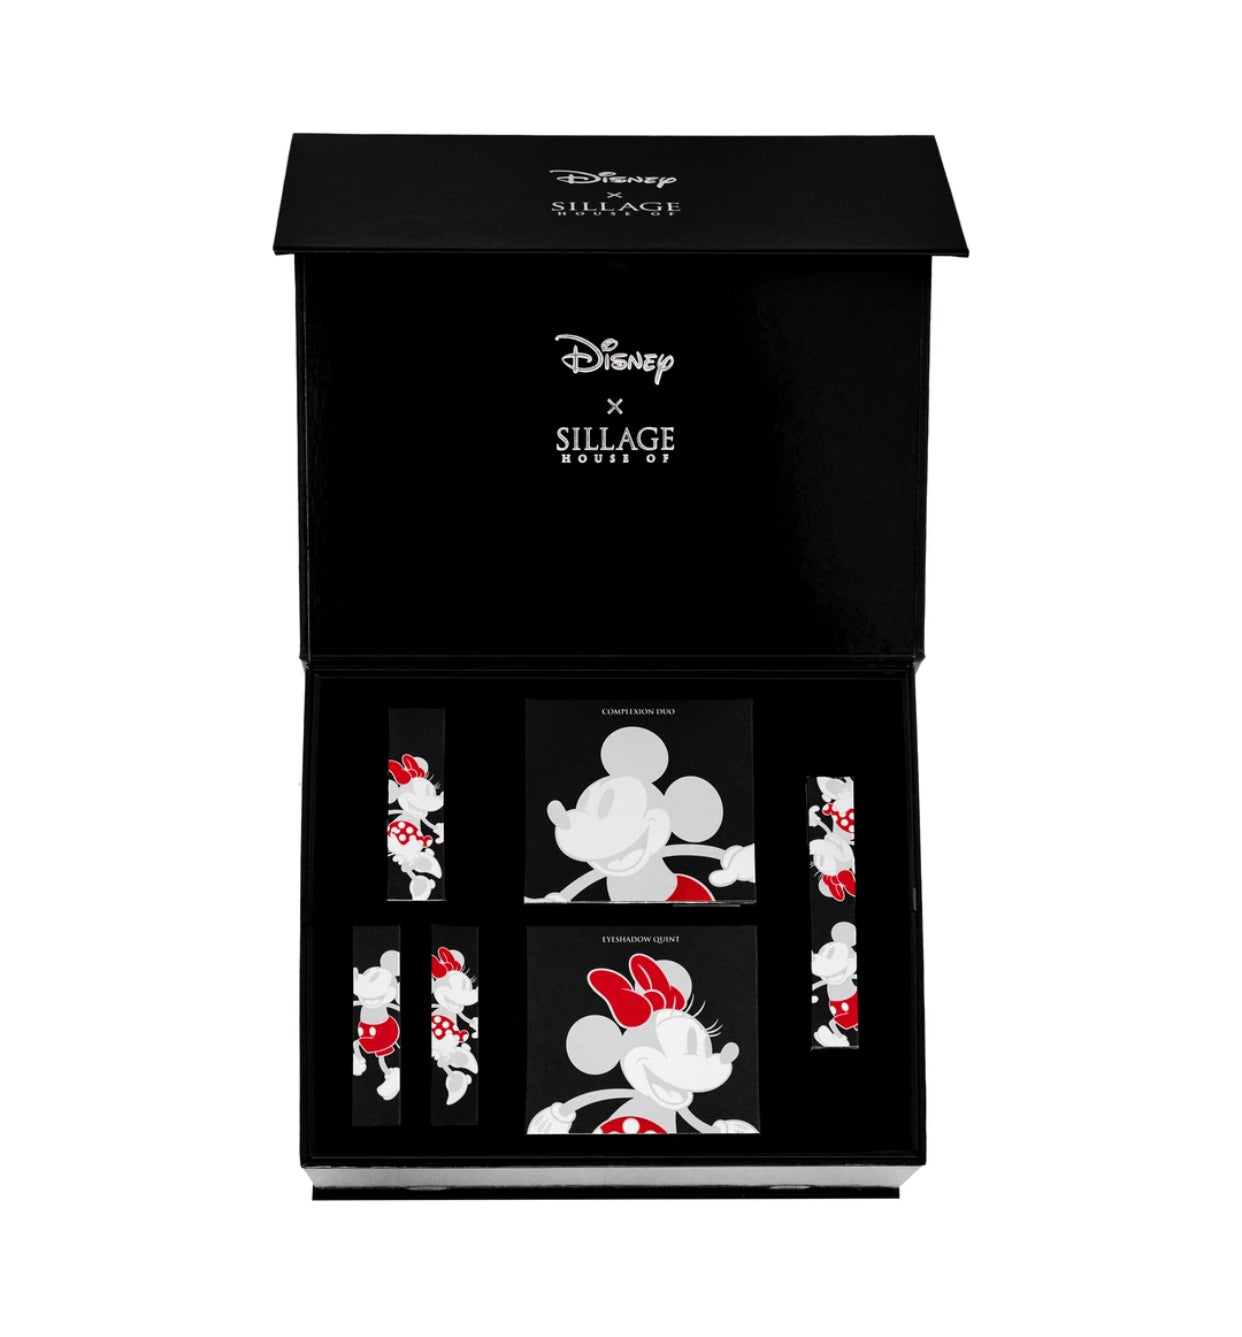 HOUSE OF SILLAGE, DISNEY X HOUSE OF SILLAGE COLLECTOR SET LIMITED EDITION